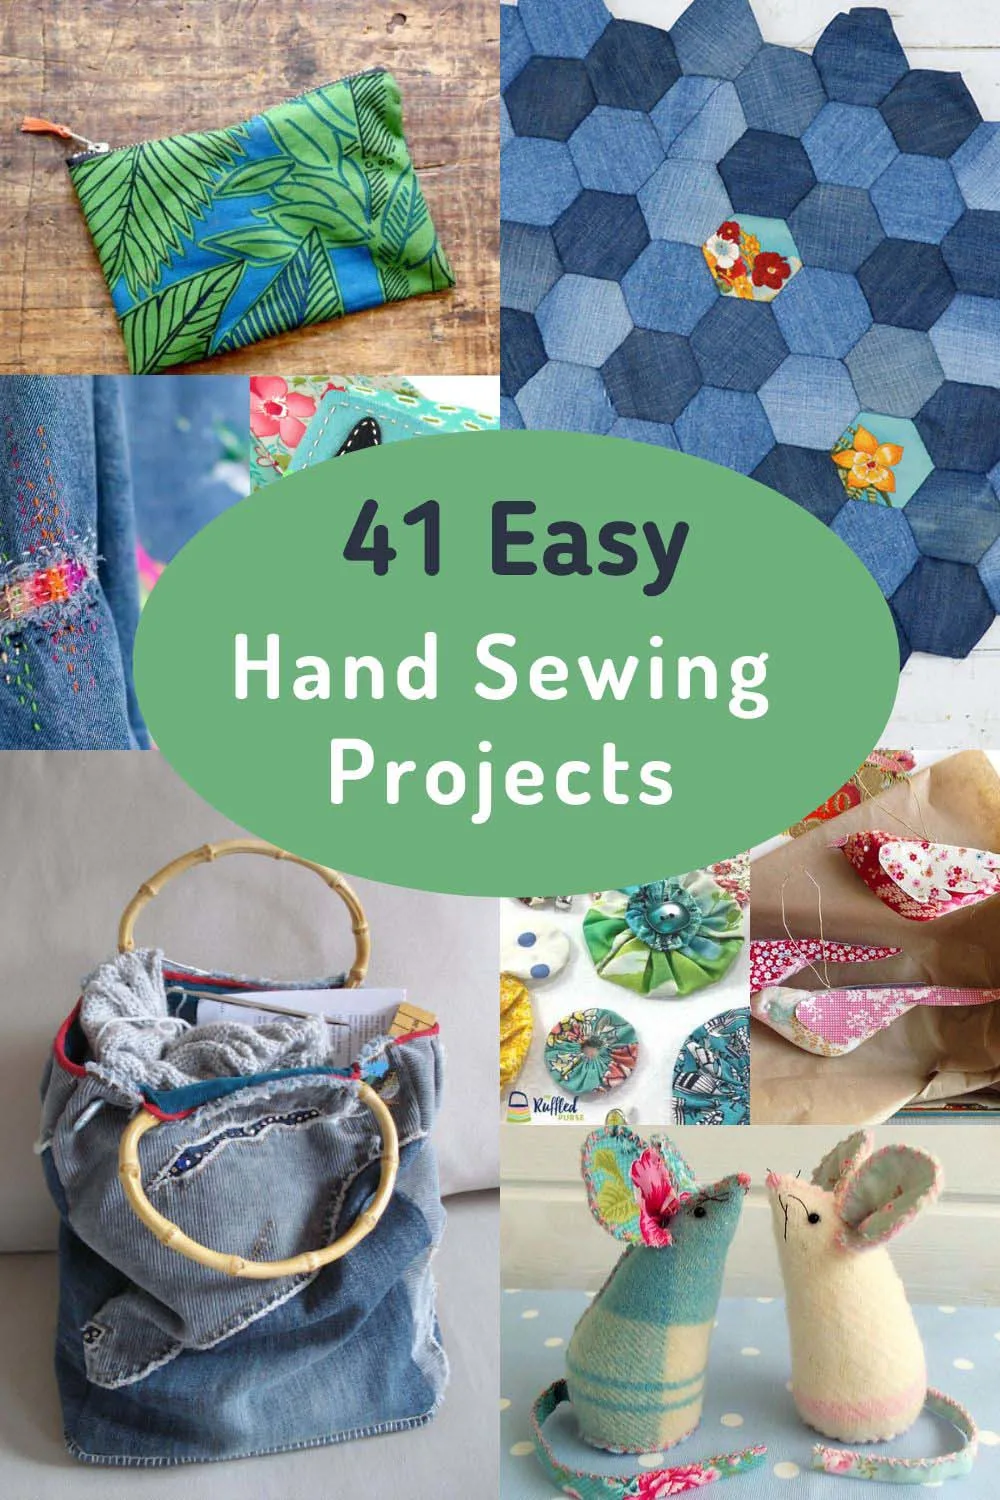 EASY SEWING~DIY SEWING PROJECTS FOR FRIENDS, CUTE HANDMADE GIFT